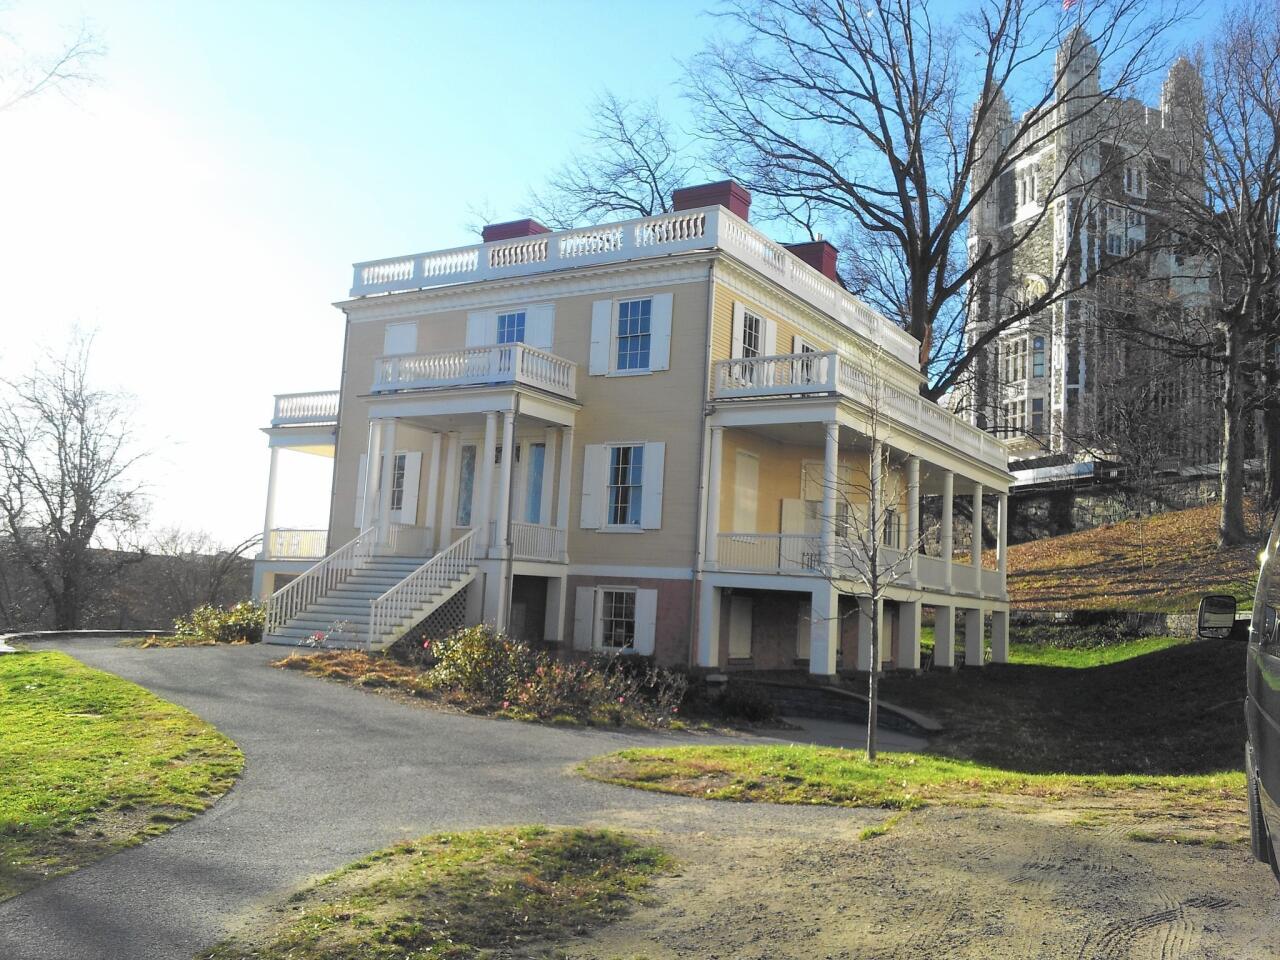 Hamilton Grange National Memorial features the home the Hamiltons built in 1802, just two years before Hamilton’s untimely death.